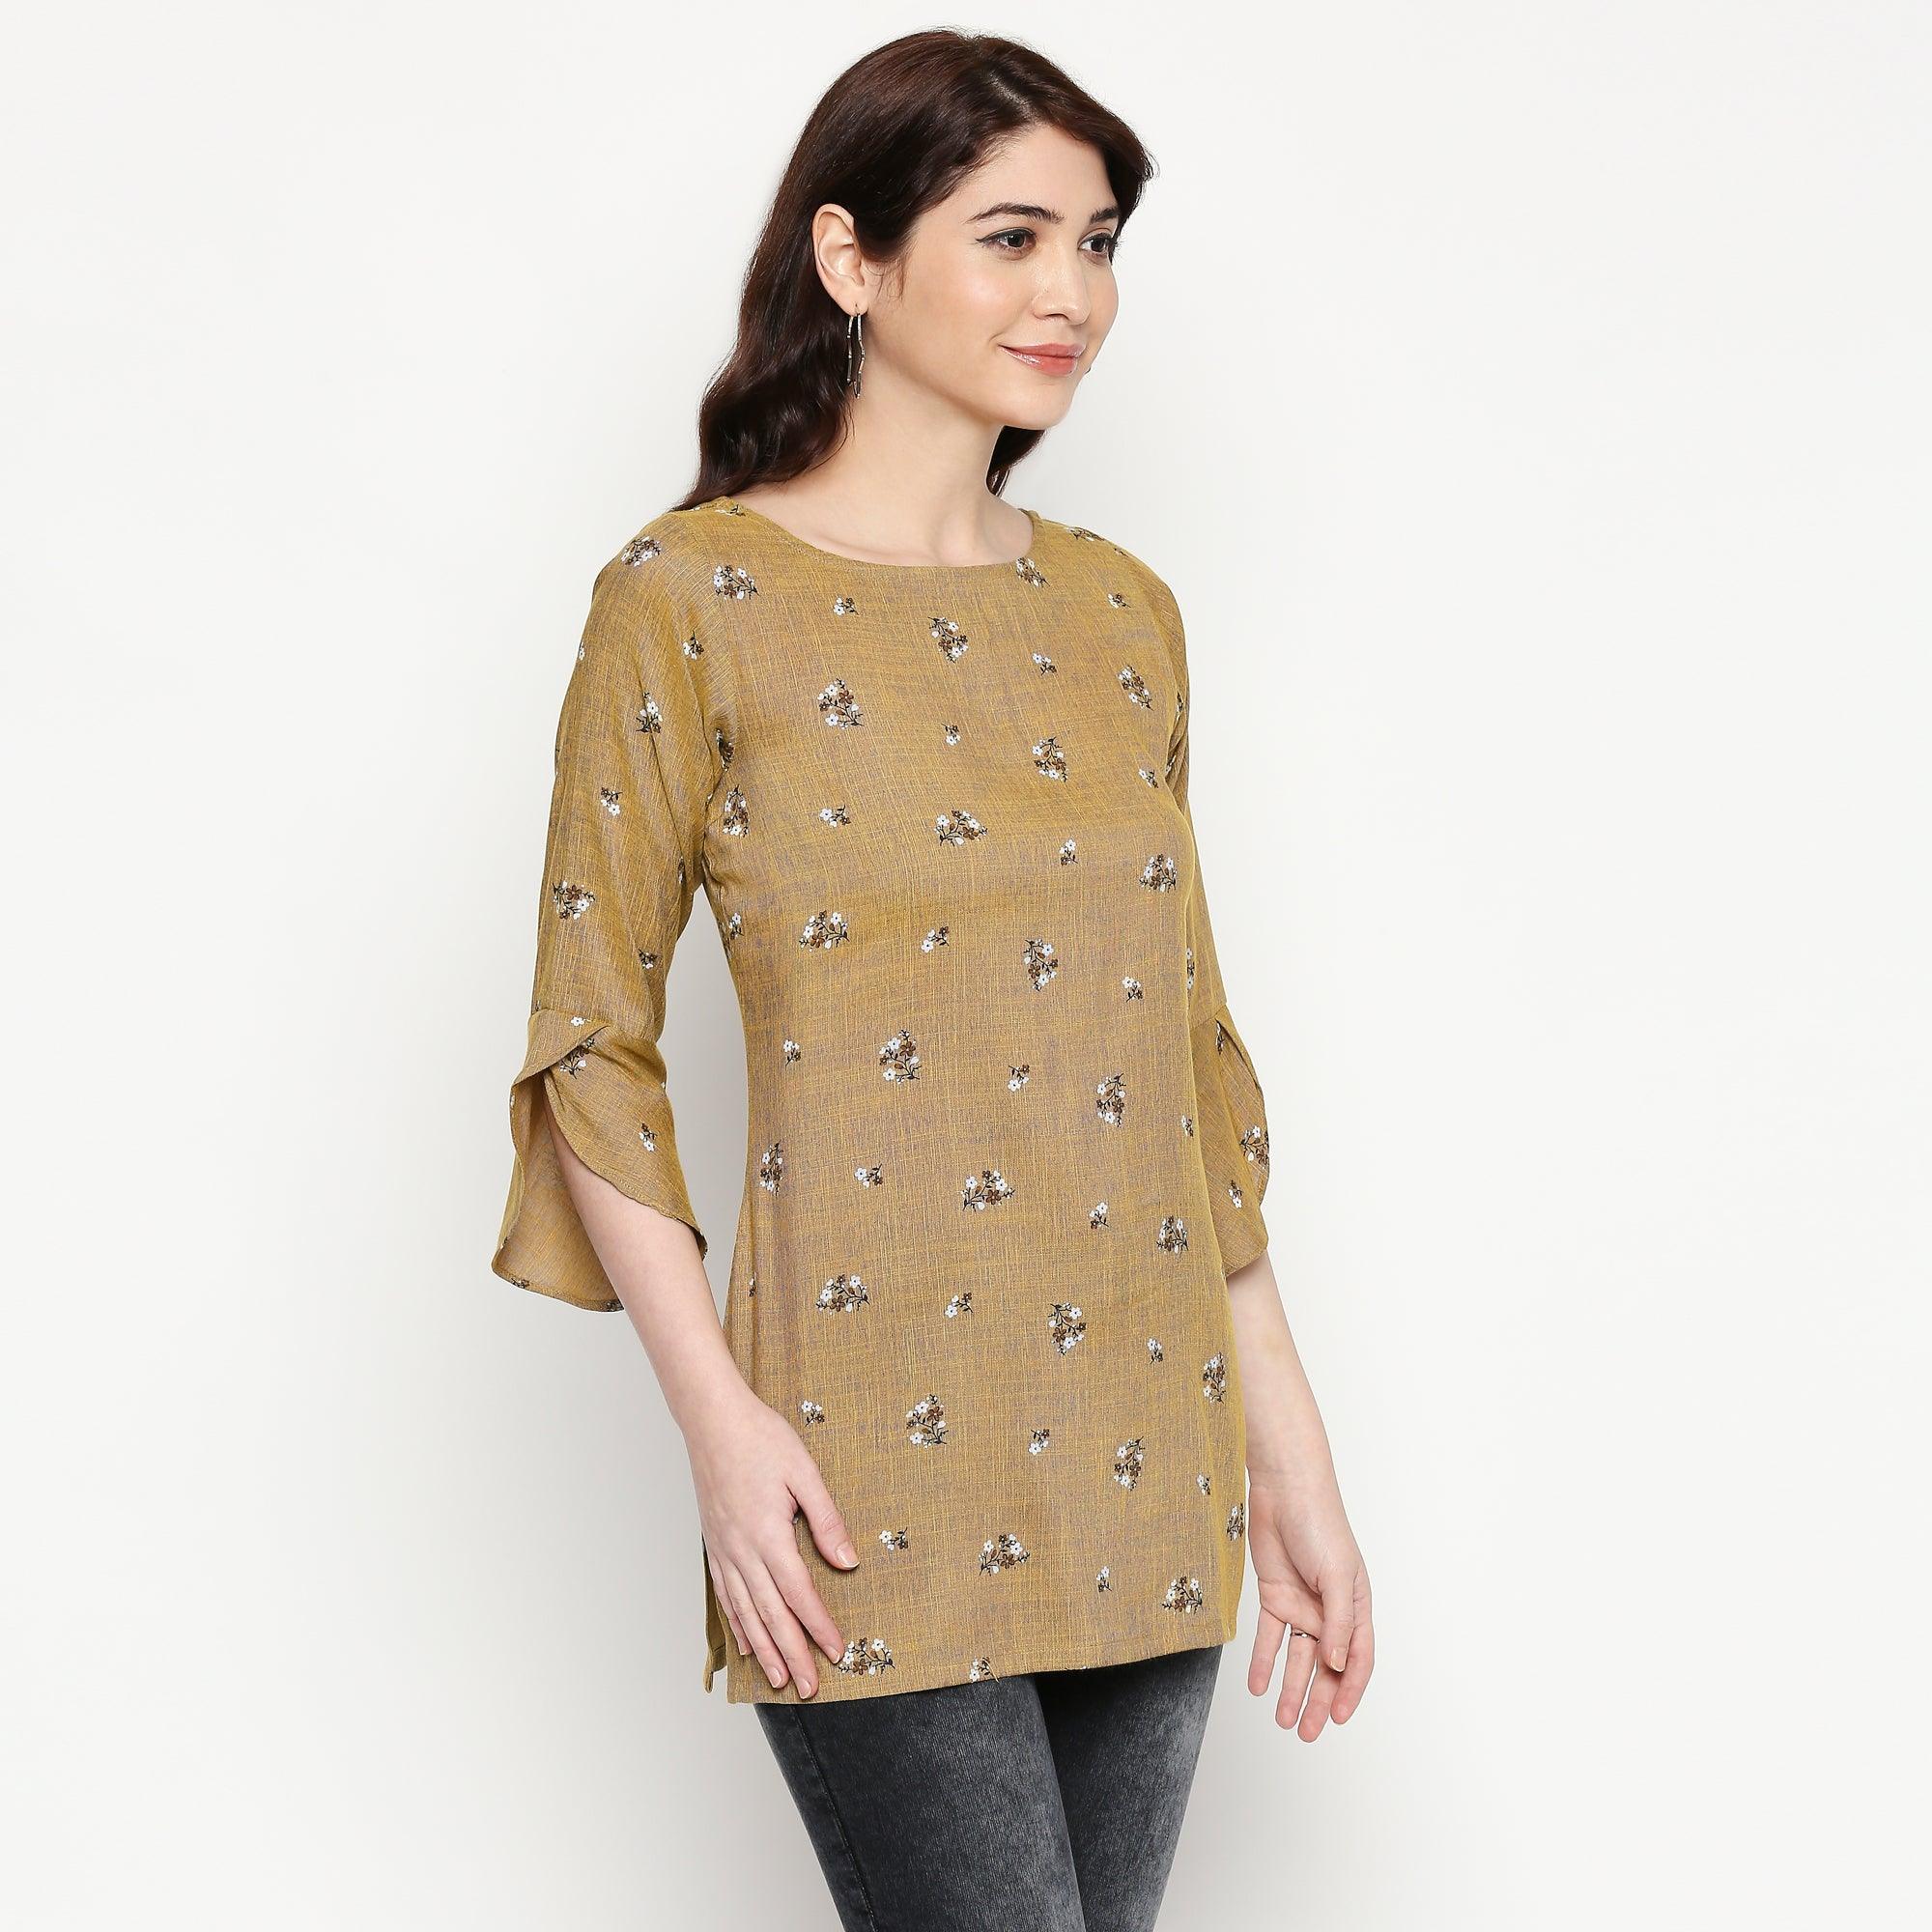 Energetic Brown Colored Casual Wear Printed Cotton Western Top - Peachmode